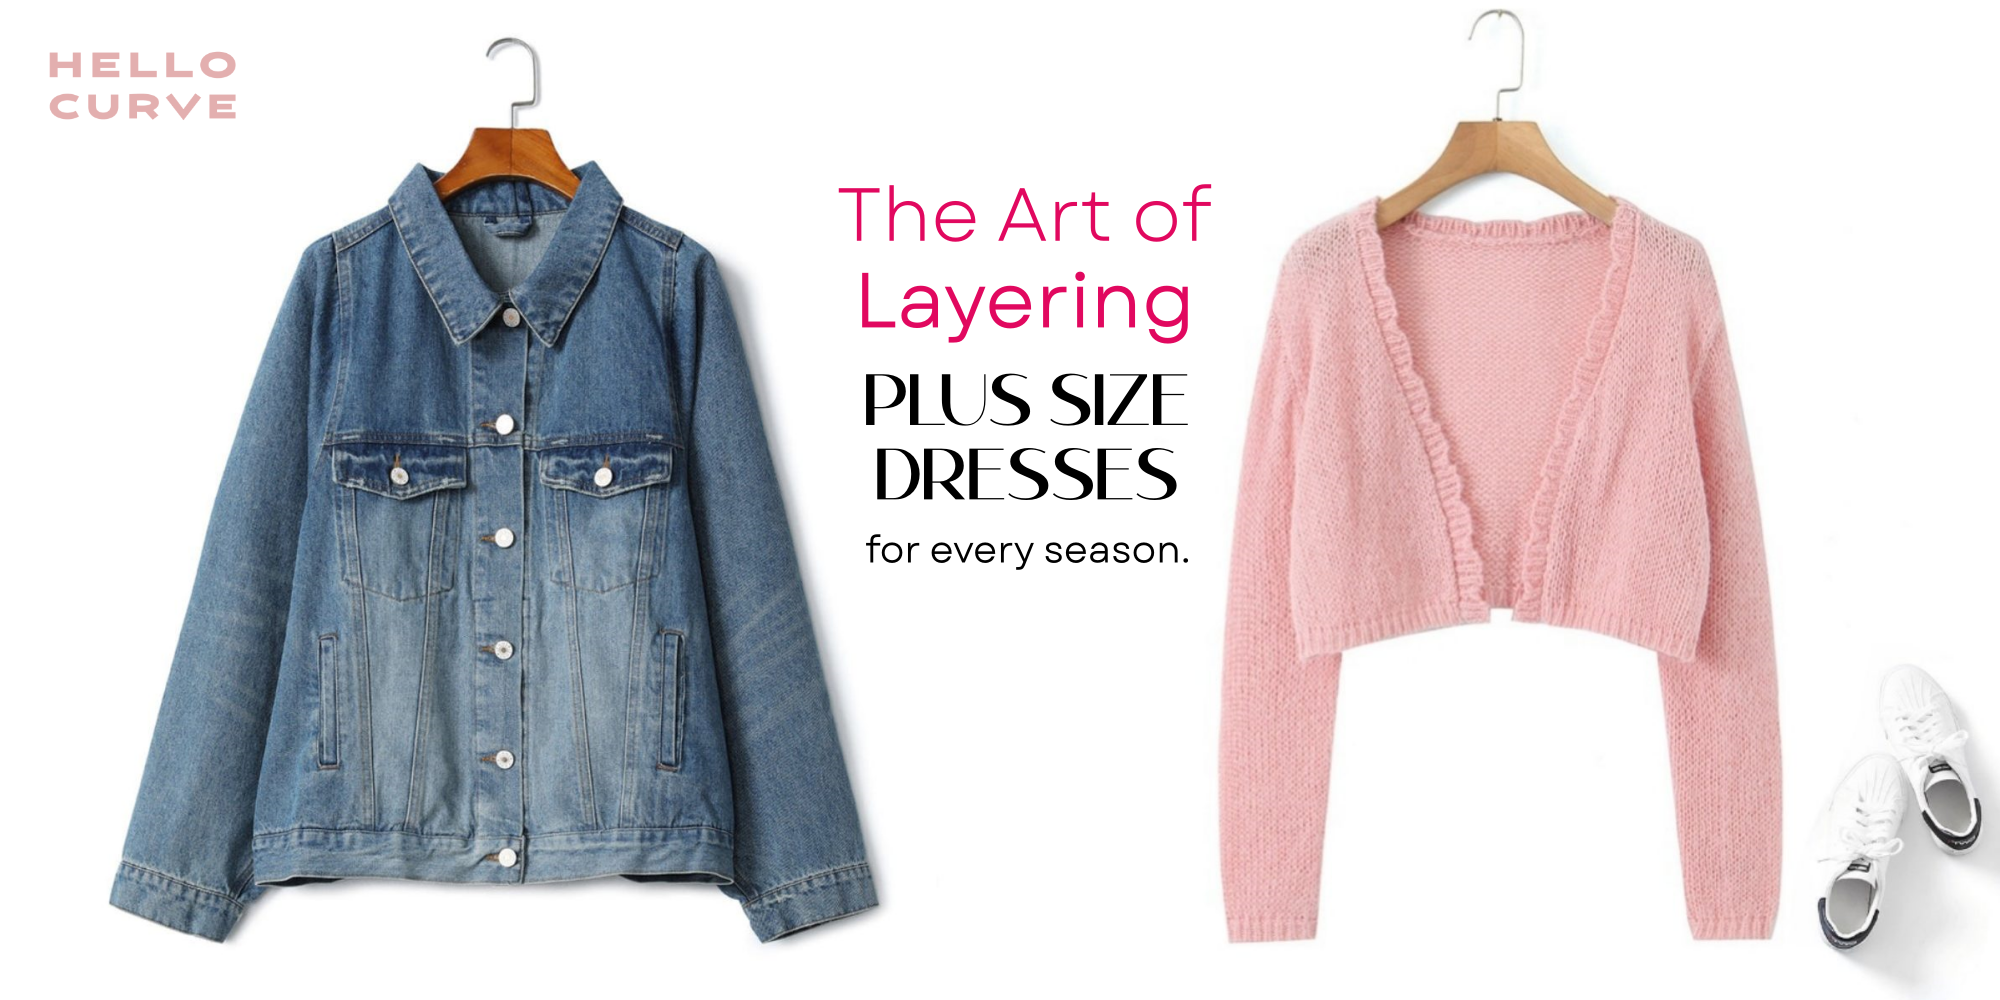 The Art of Layering: Plus Size Dresses for Every Season